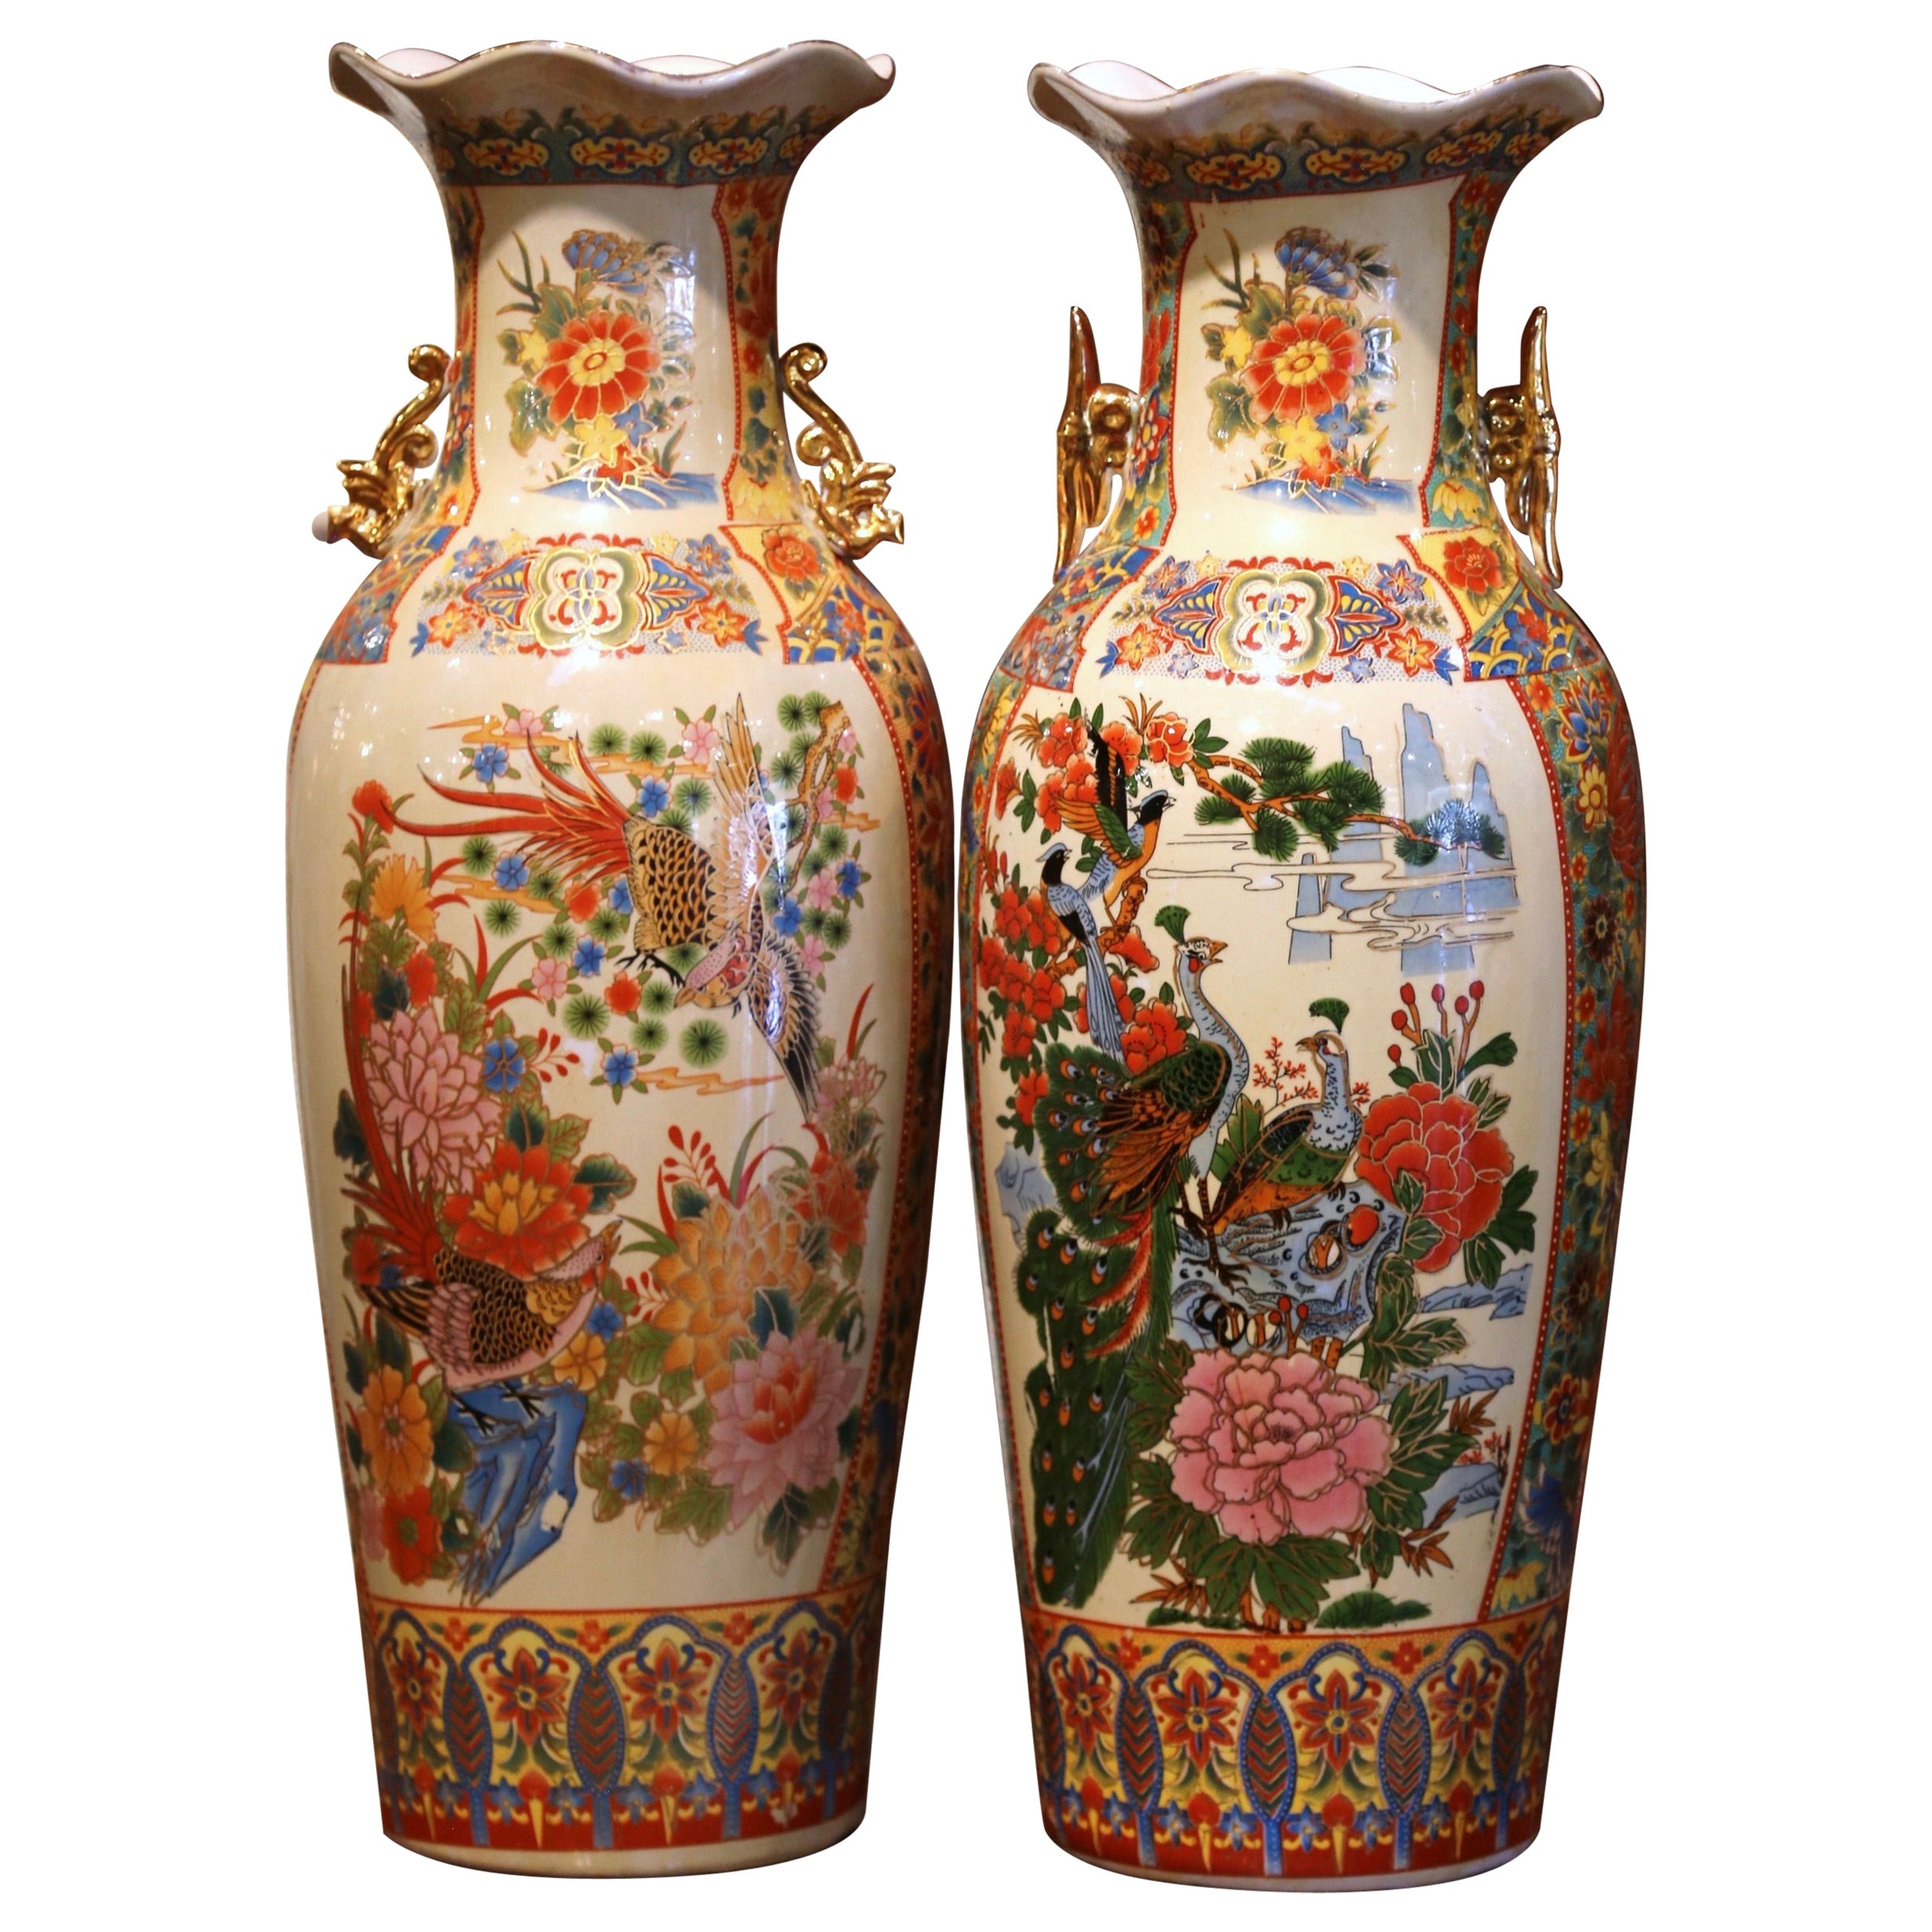 Pair of Mid-Century Chinese Polychrome Painted and Gilt Porcelain Vases